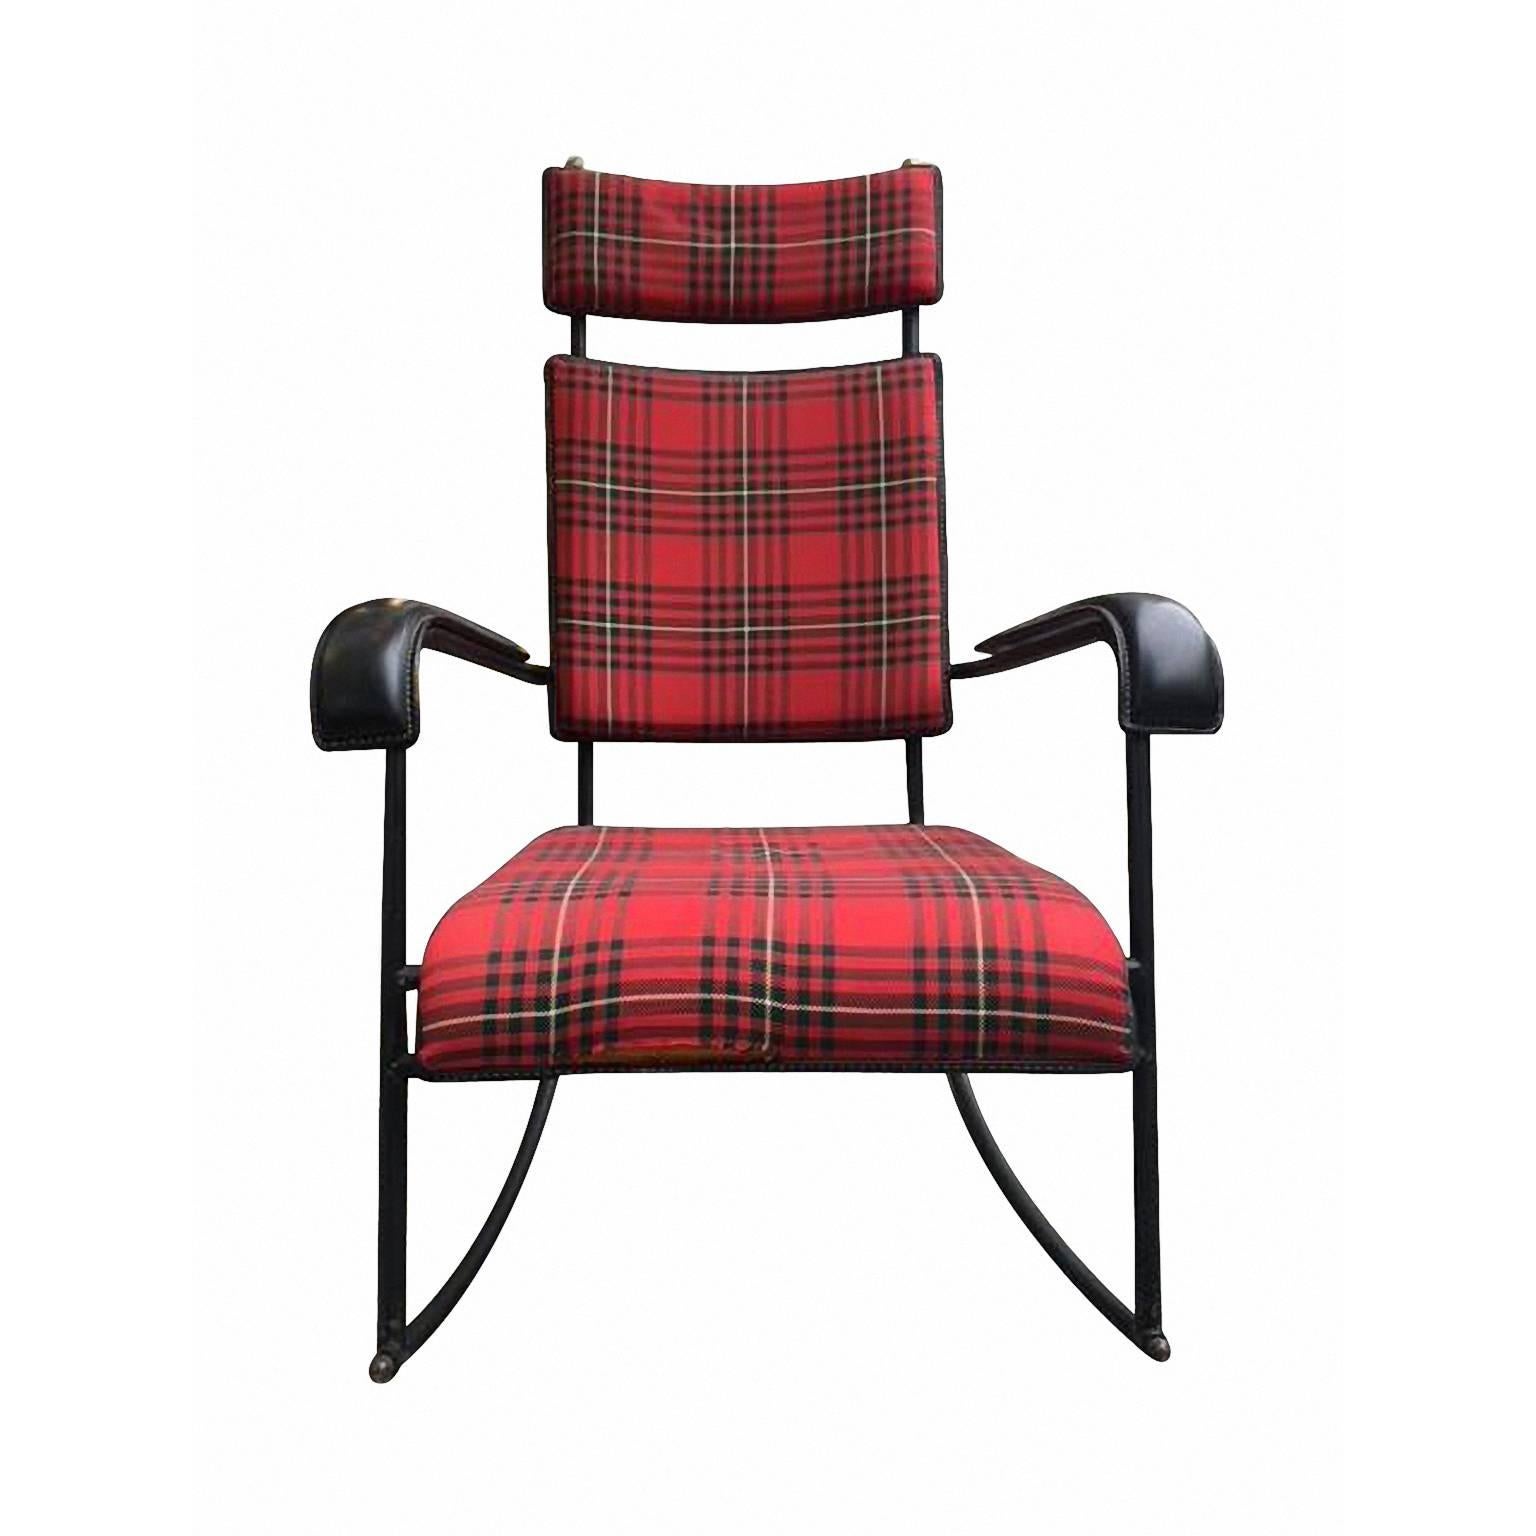 Mid-20th Century Jacques Adnet 1950s Rare Tartan Rocking Chair For Sale